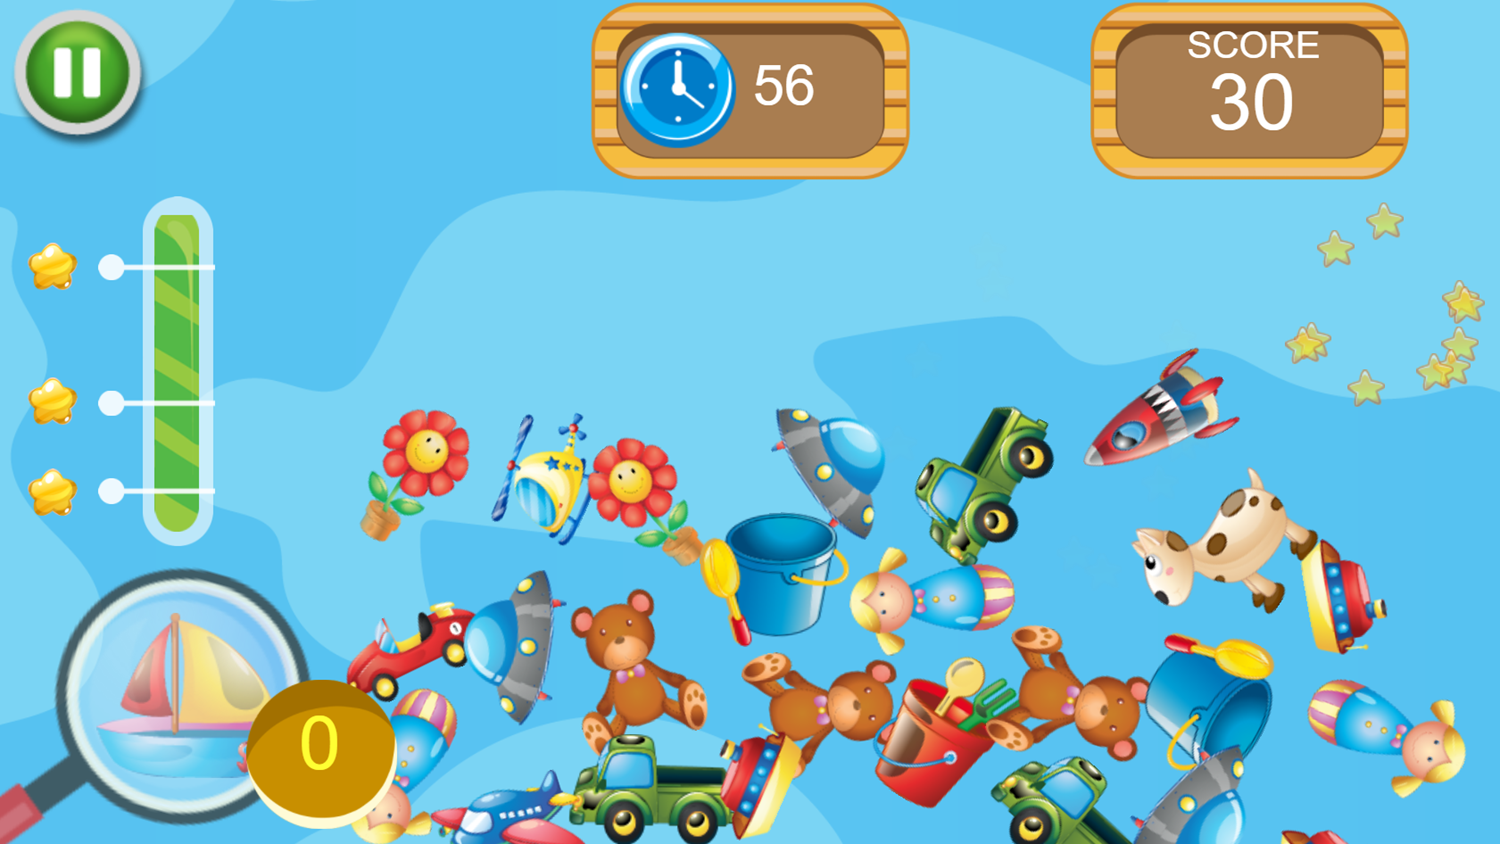 Find Toys Game Play Screenshot.